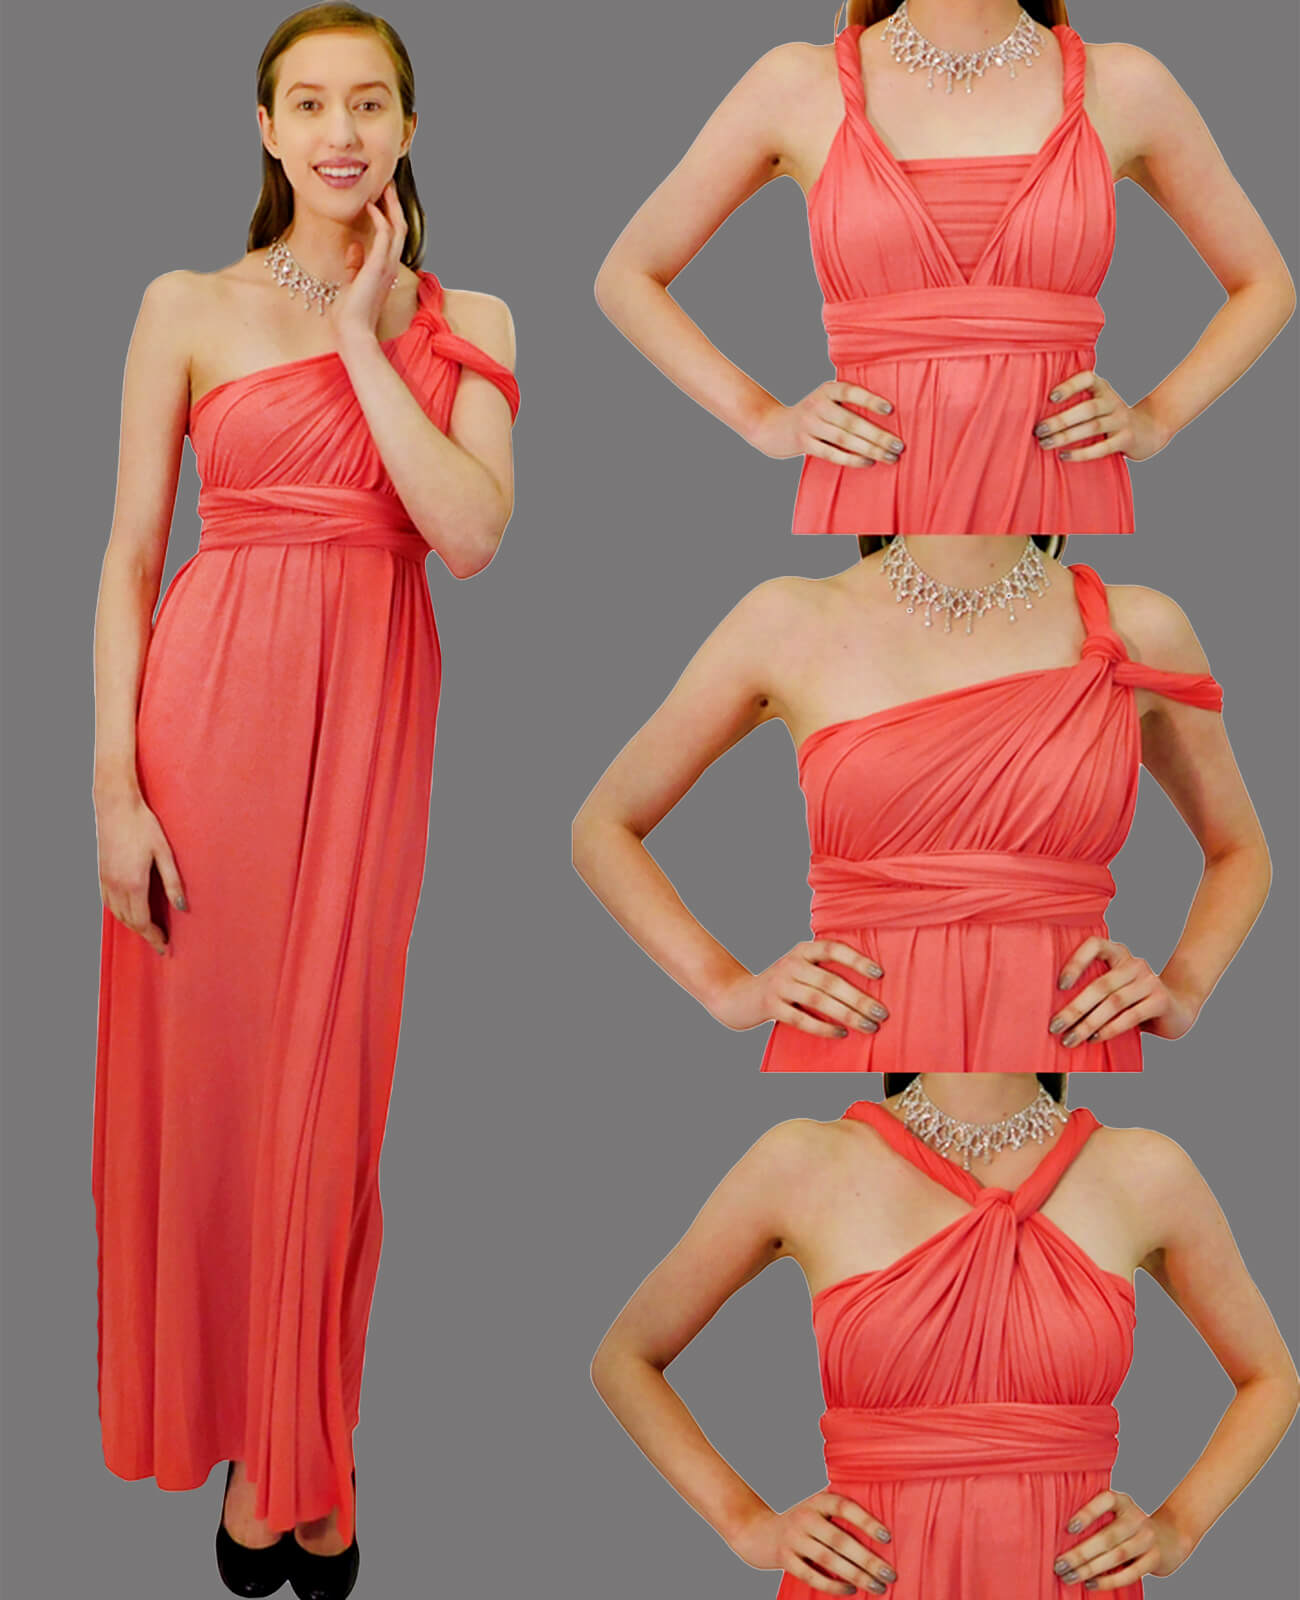 infinity dress coral pink